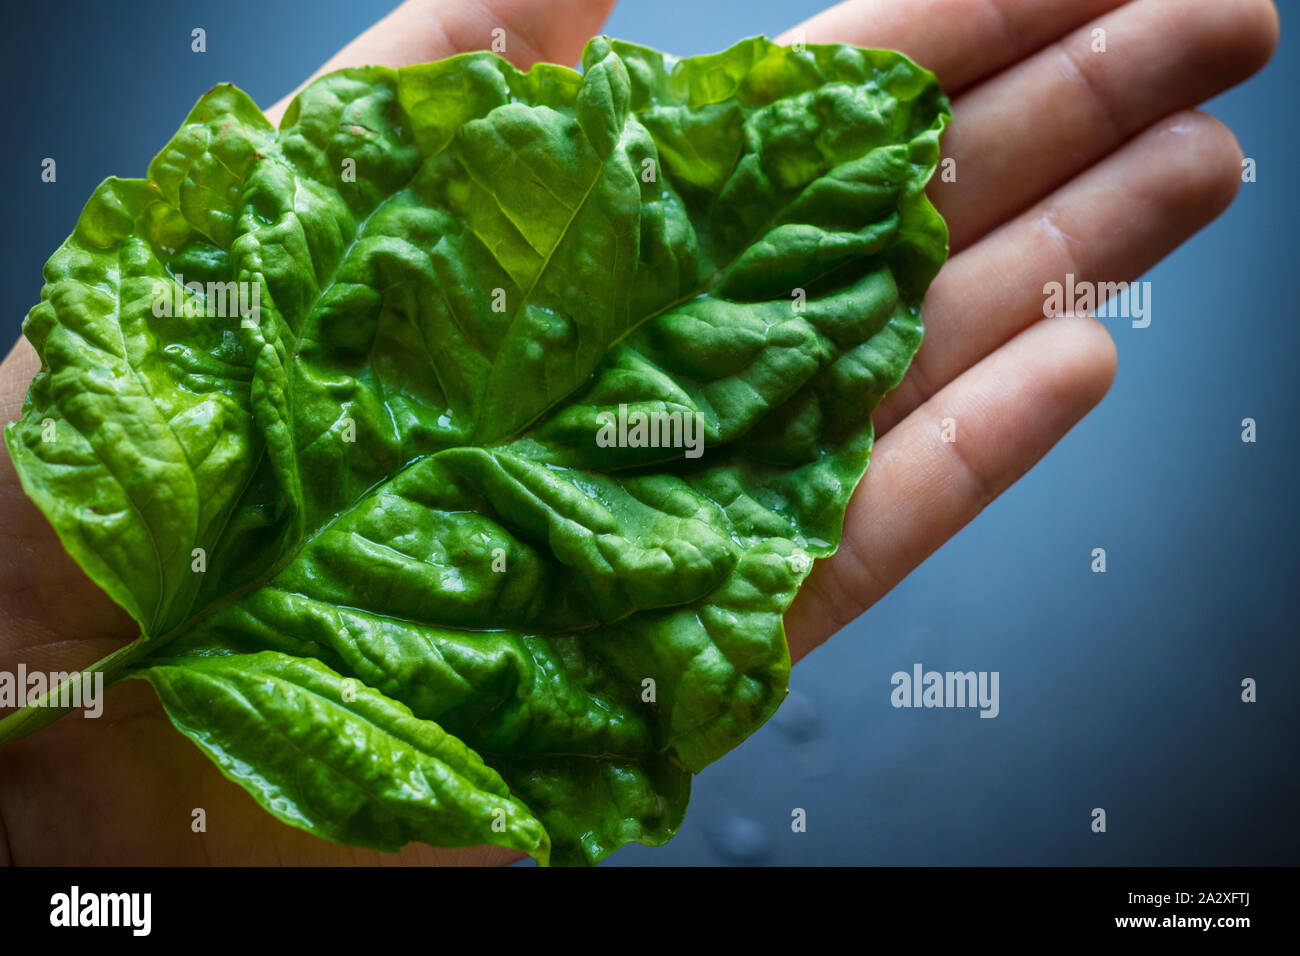 Very big fresh raw green basil leaf covering open palm. Top view Stock Photo